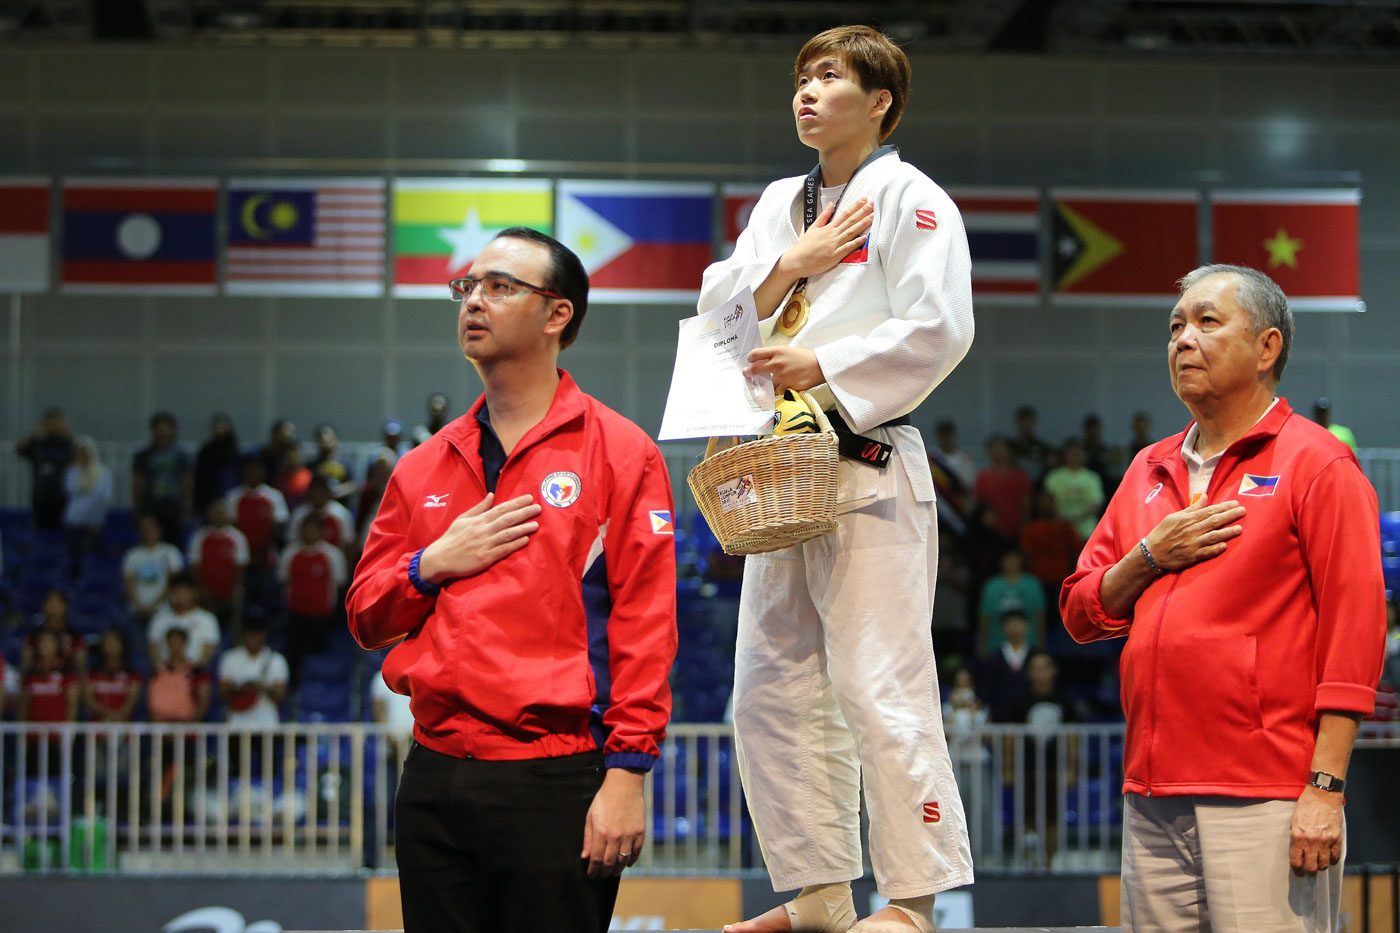 NATIONAL ANTHEM. Kiyomi Watanabe of the Philippines clinches the gold medal in the women's -63kg judo event. She is seen here during the Philippine national anthem with Philippine officials. Photo by PSC-POC Media Group 